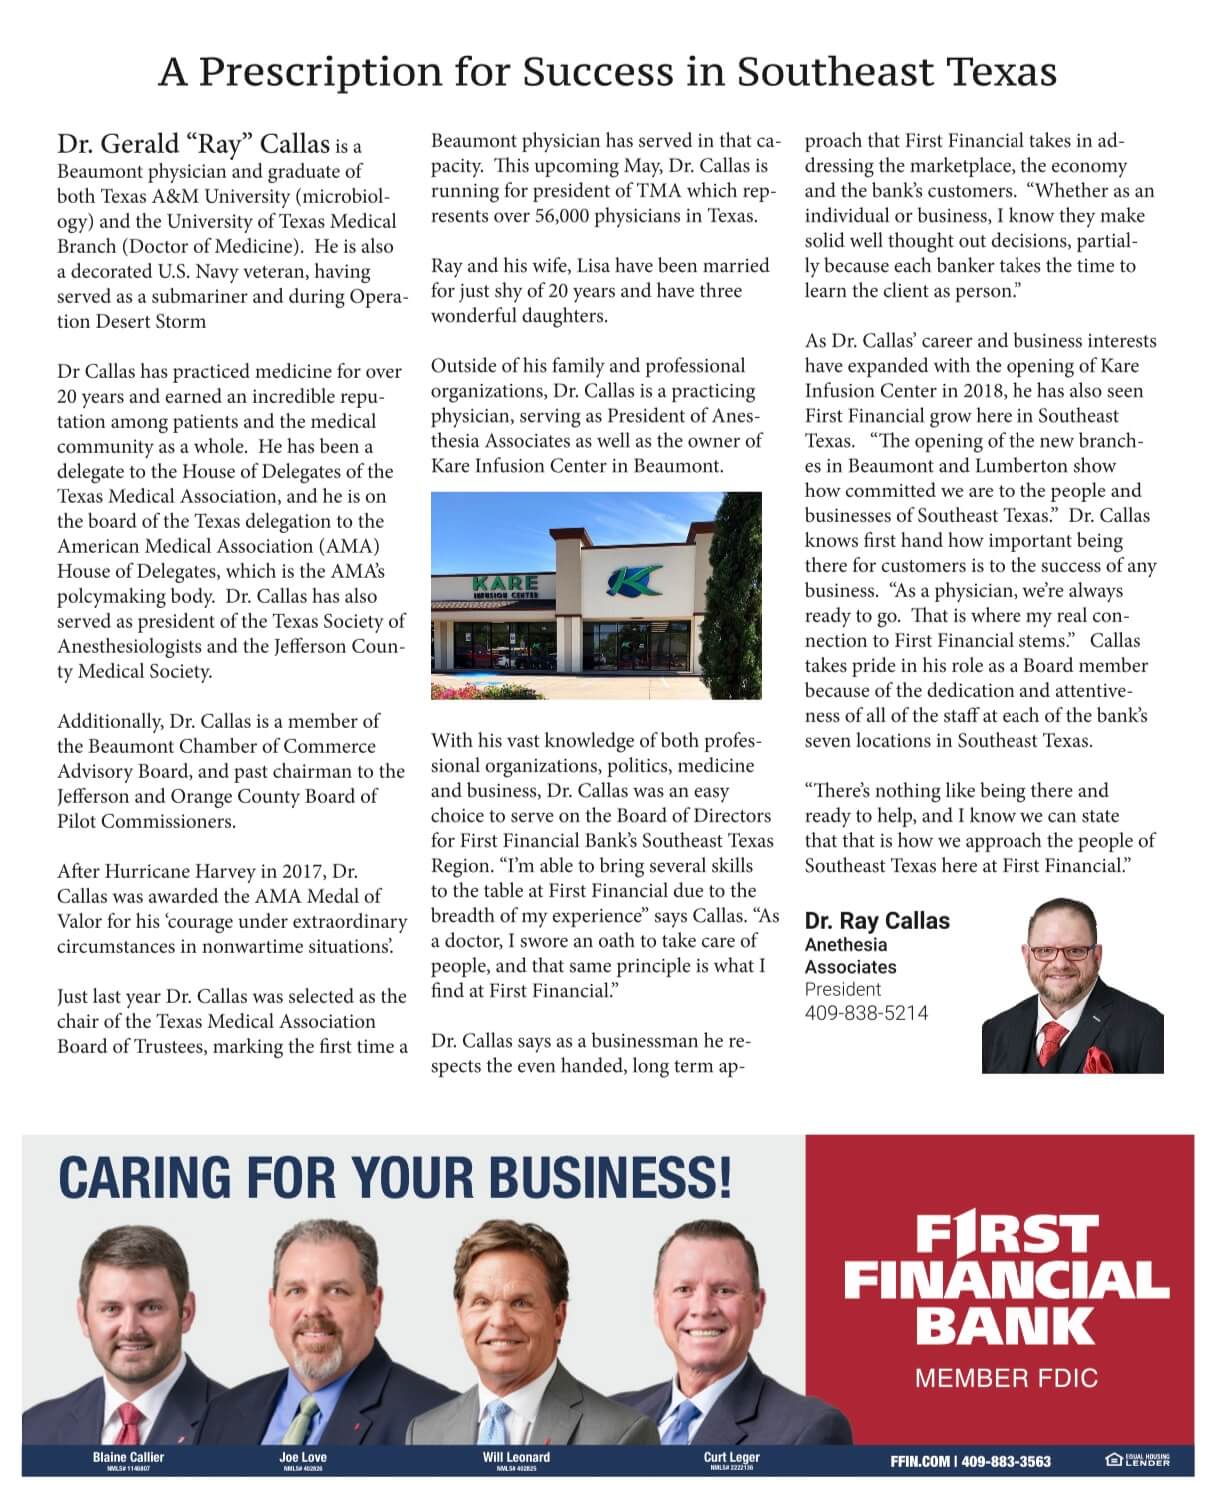 print advertorial for First Financial Bank